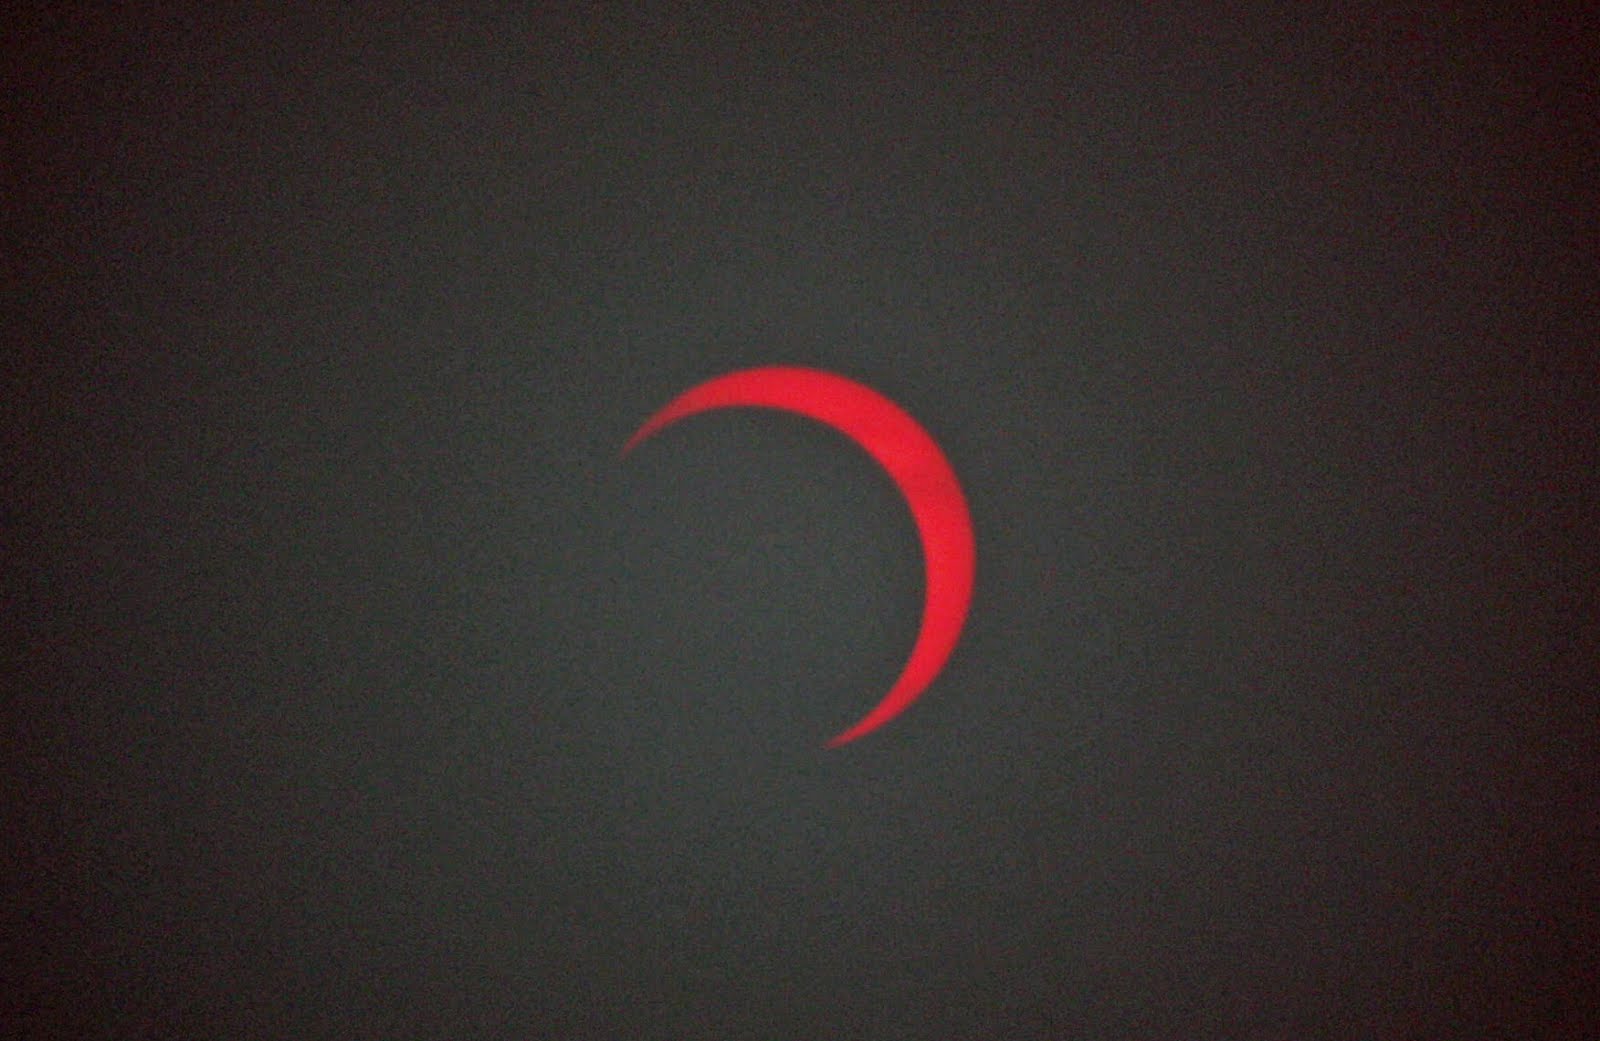 boise-daily-photo-eclipse-through-homemade-filters